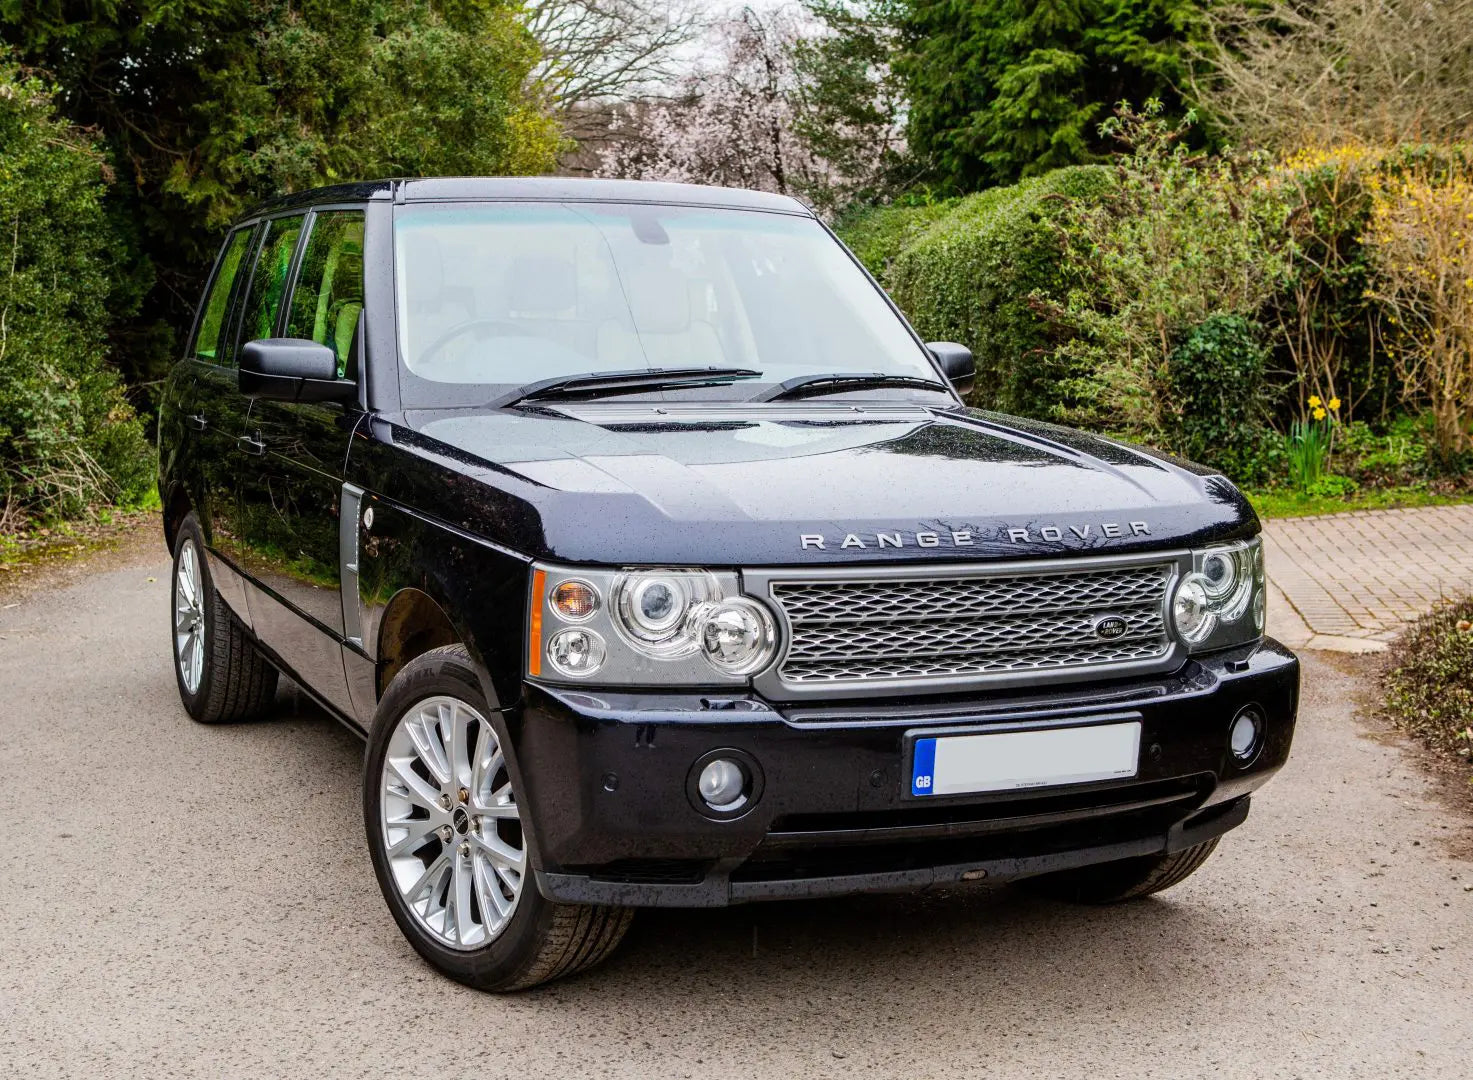 The Range Rover L322 – An Insight